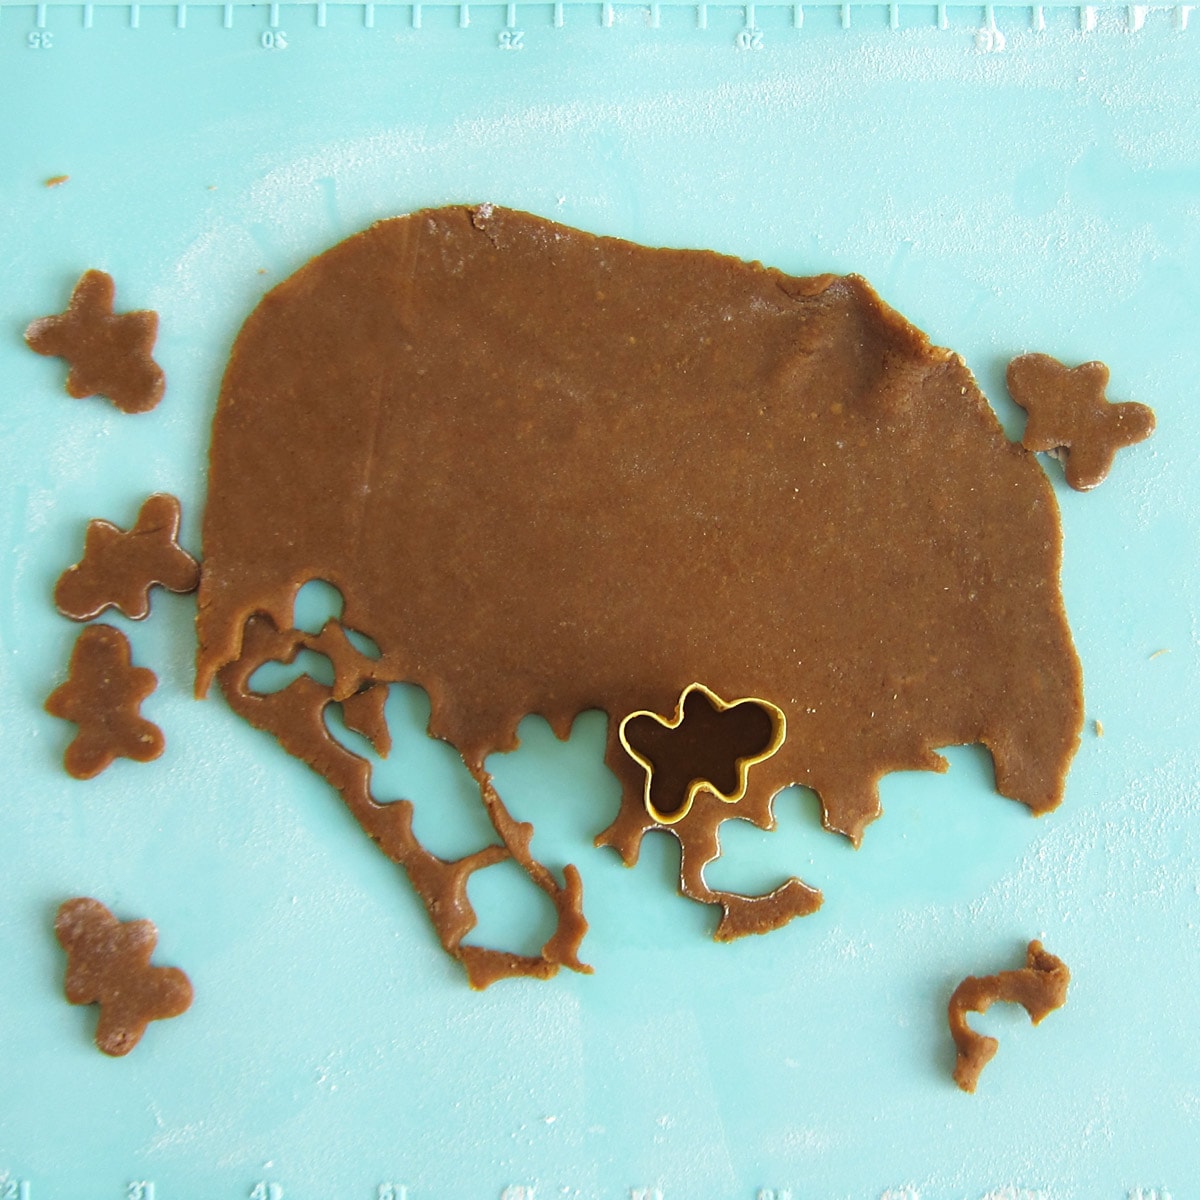 cutting gingerbread cookie dough using a small cookie cutter.